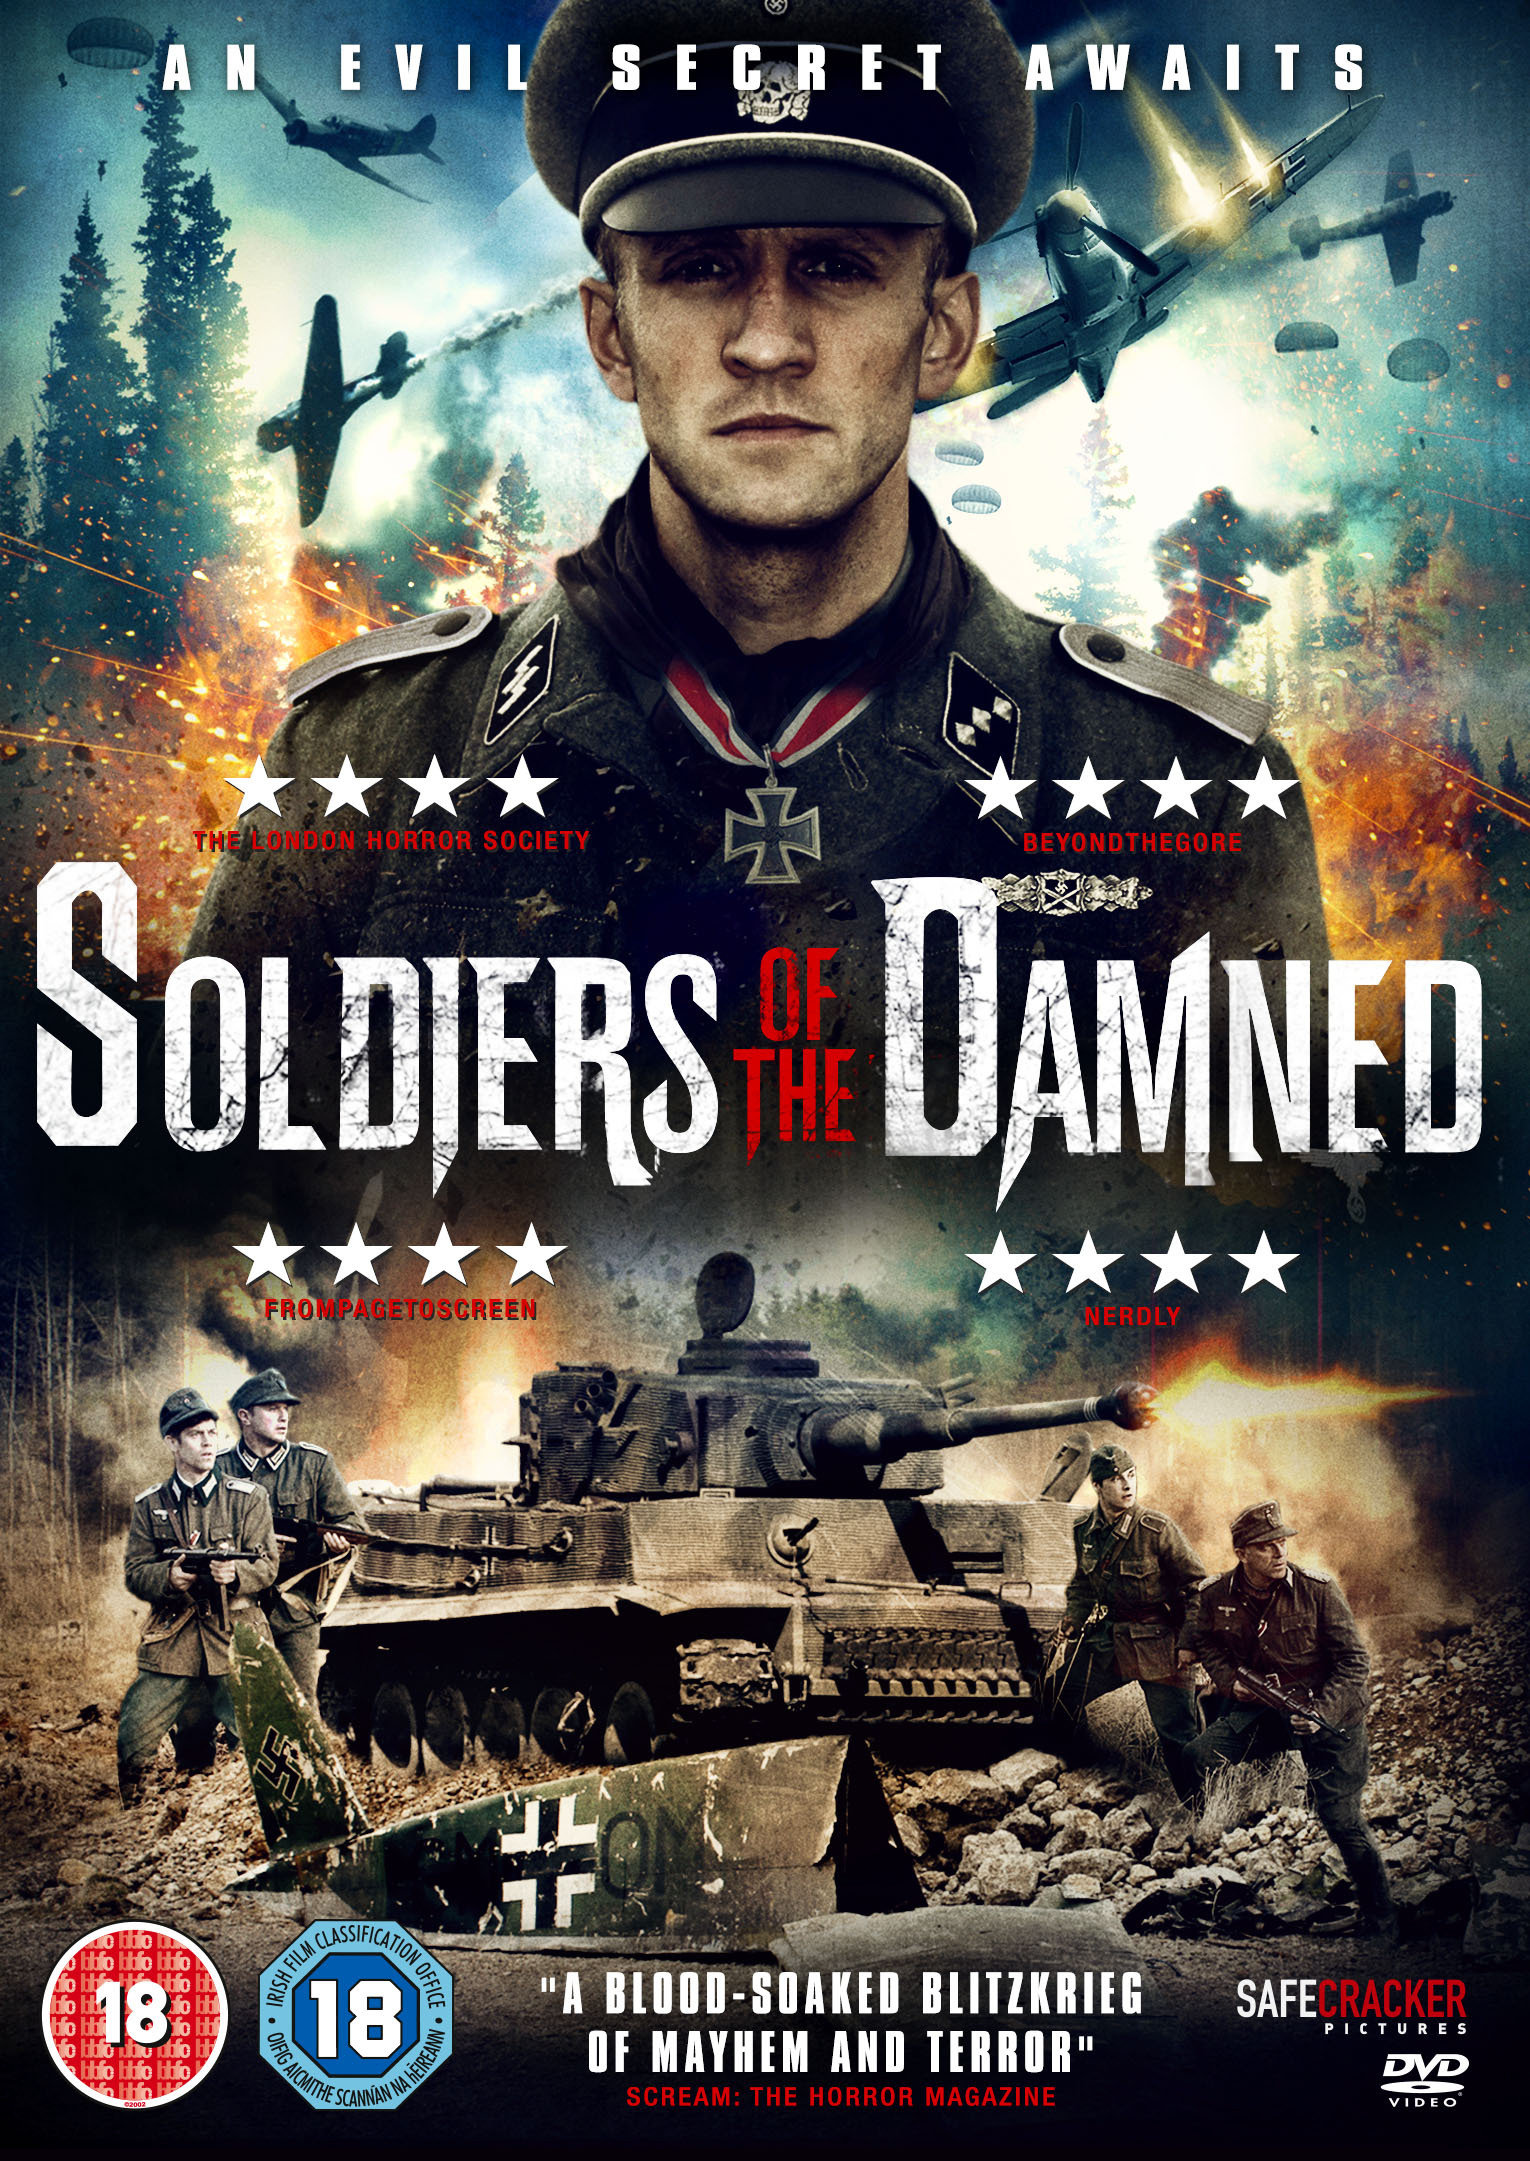 Cartel de Soldiers of the damned